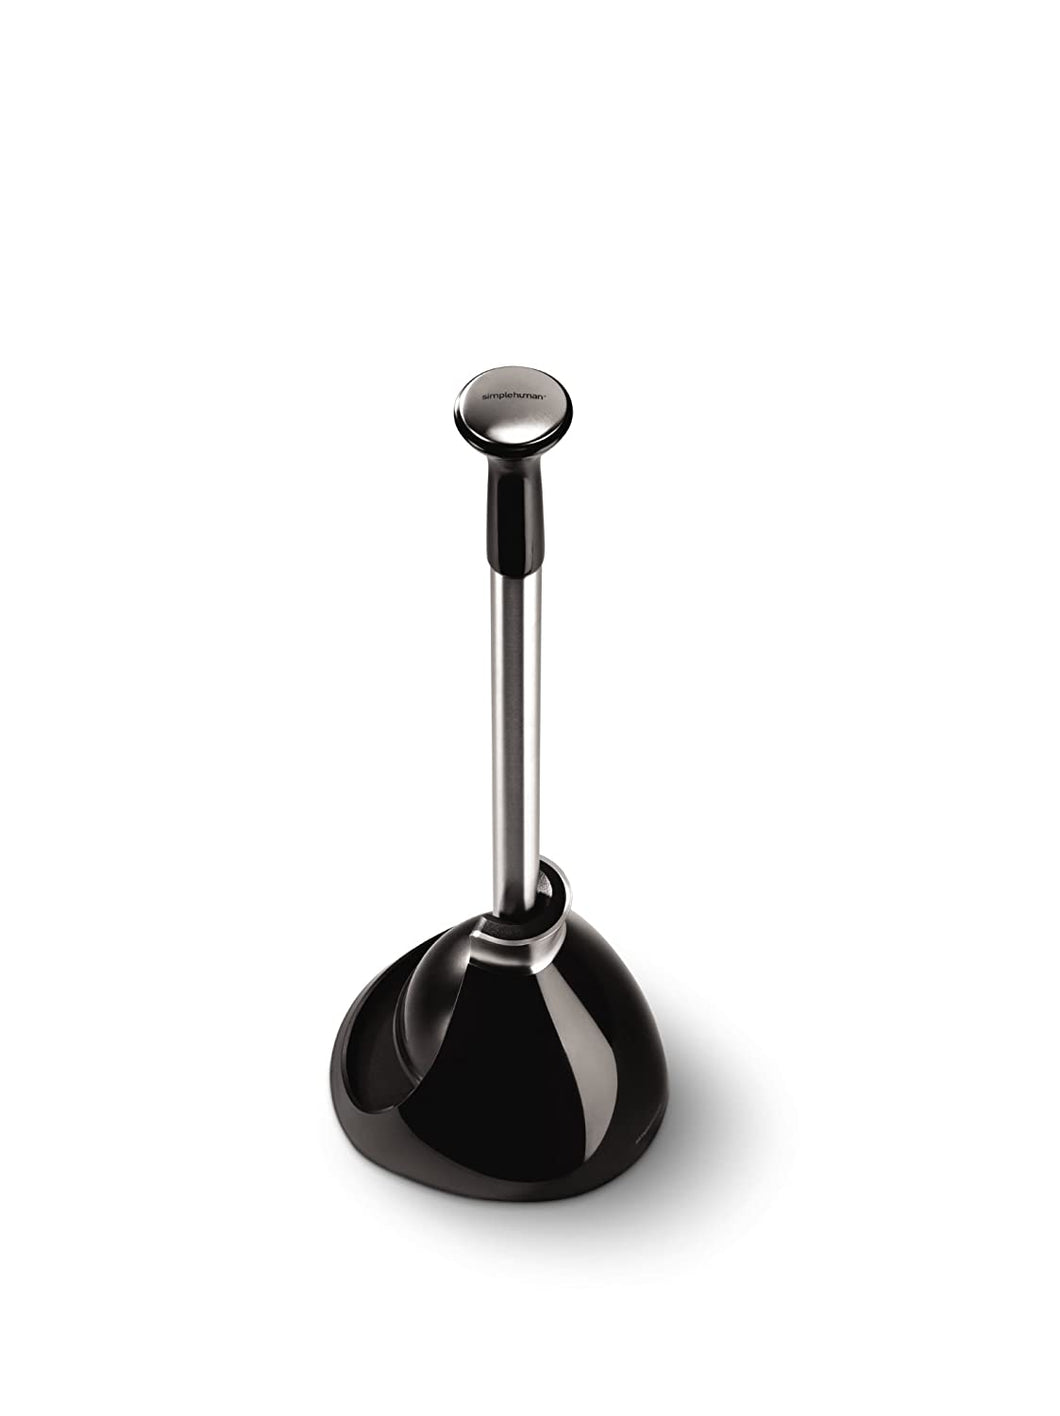 simplehuman Toilet Plunger with Holder, Stainless Steel, Black